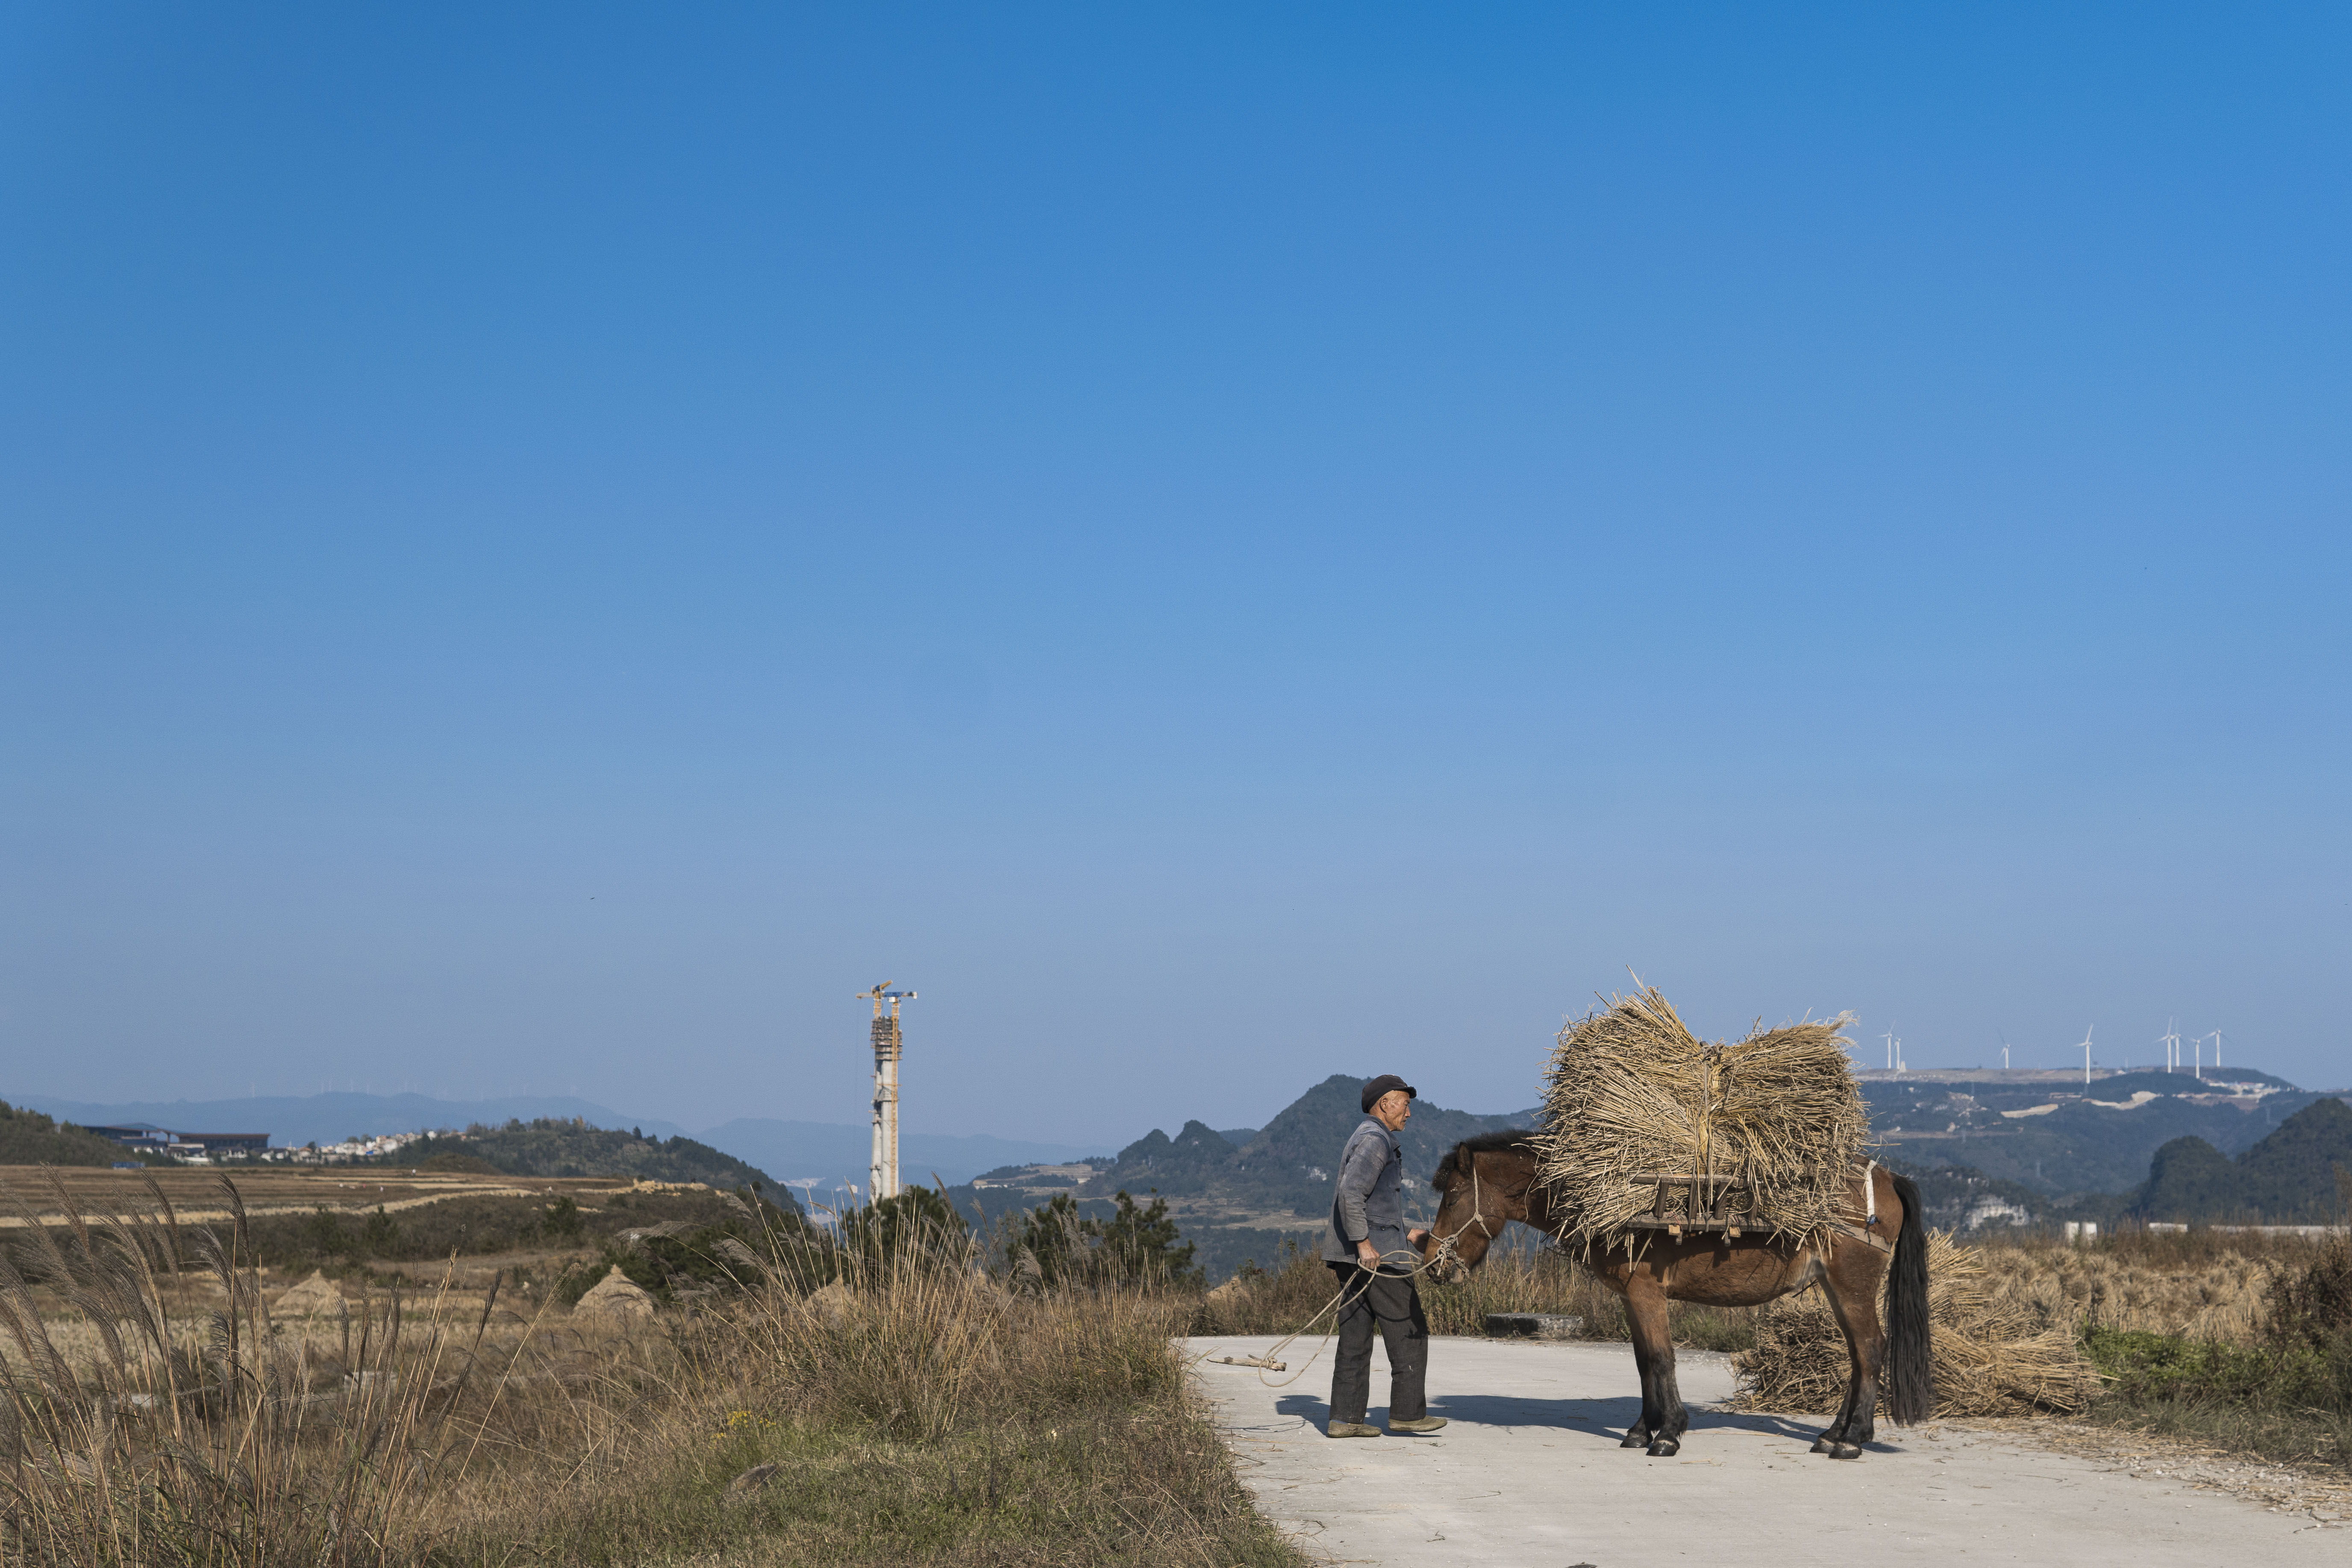 Horse Hay Farmers Road Landscape Outdoors 5504x3669